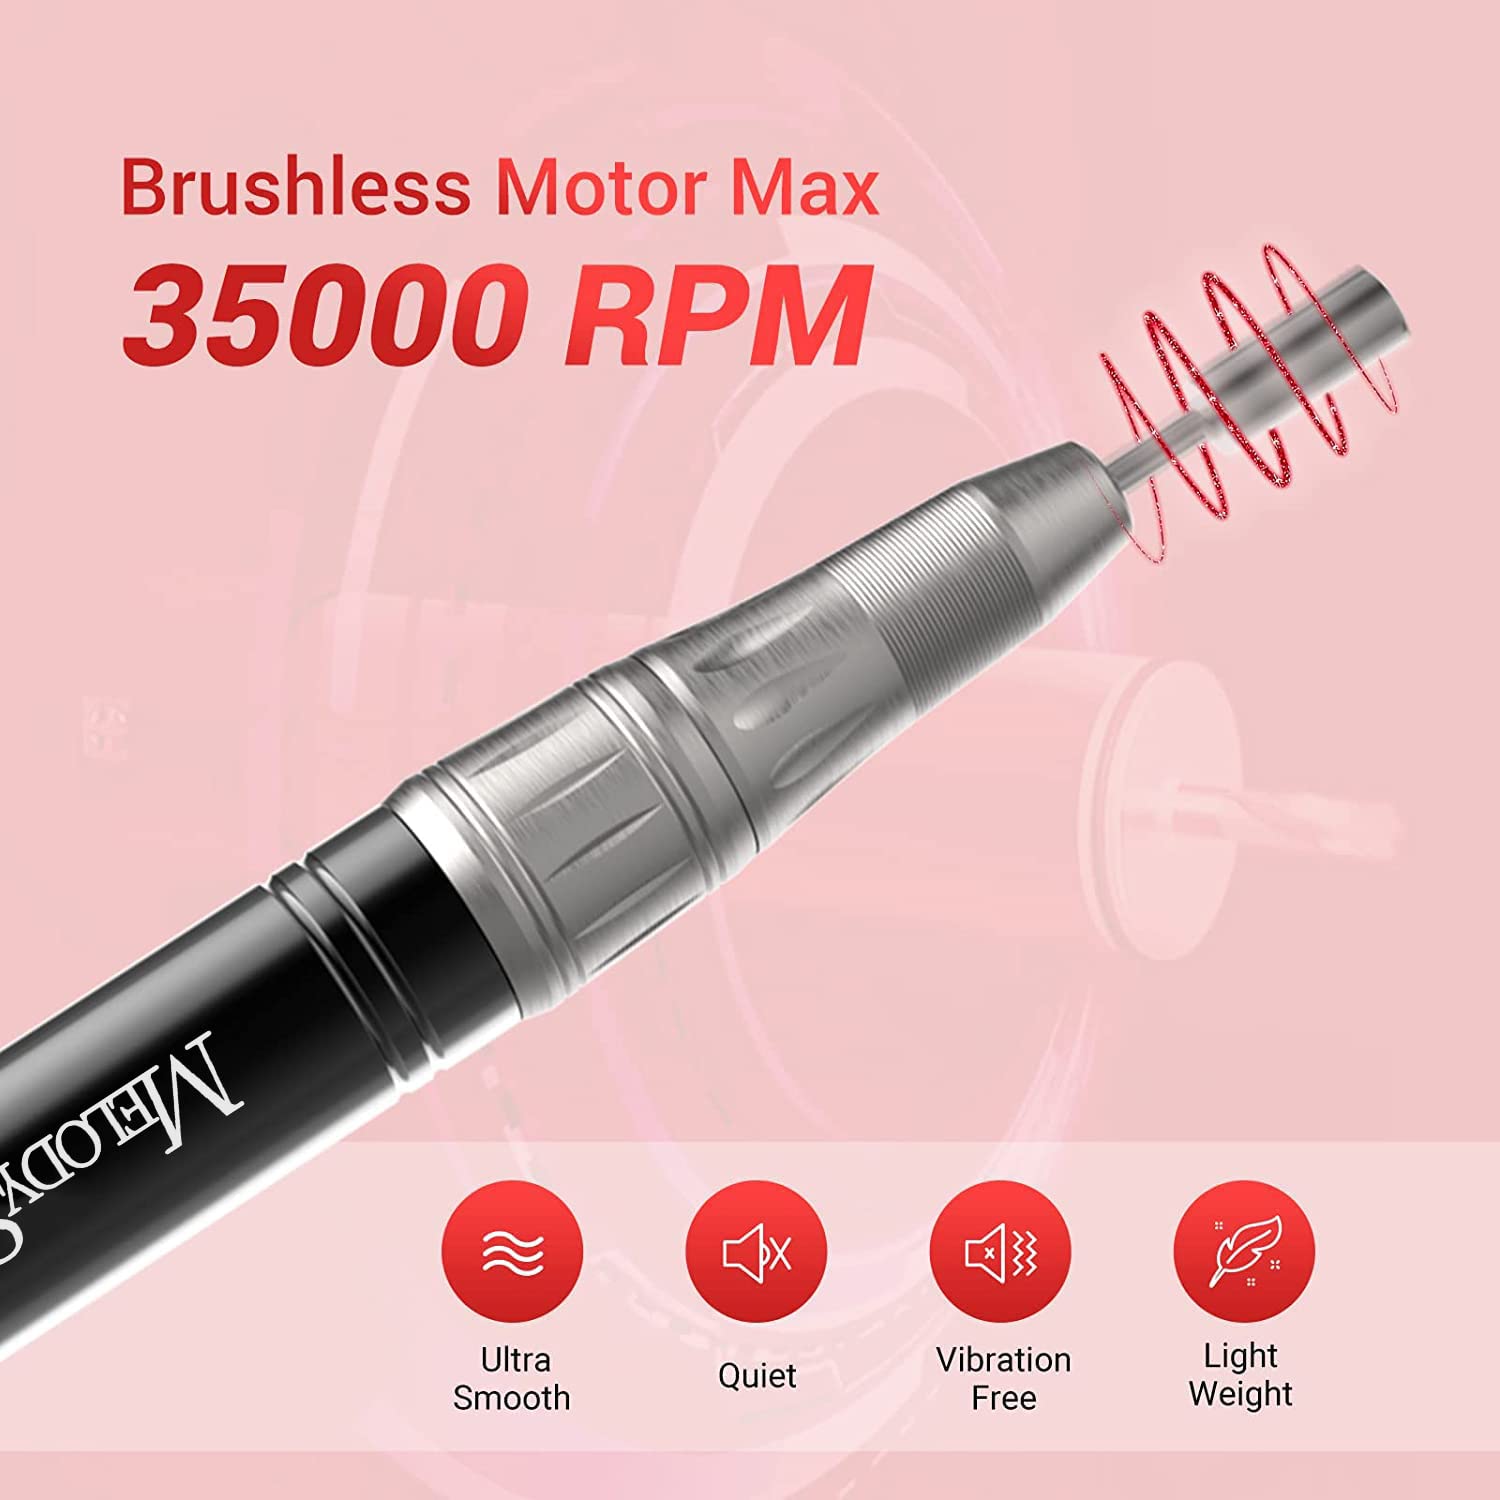 MR3-Kanon Rechargeable Nail Drill 35,000 RPM-Customized (US ONLY)